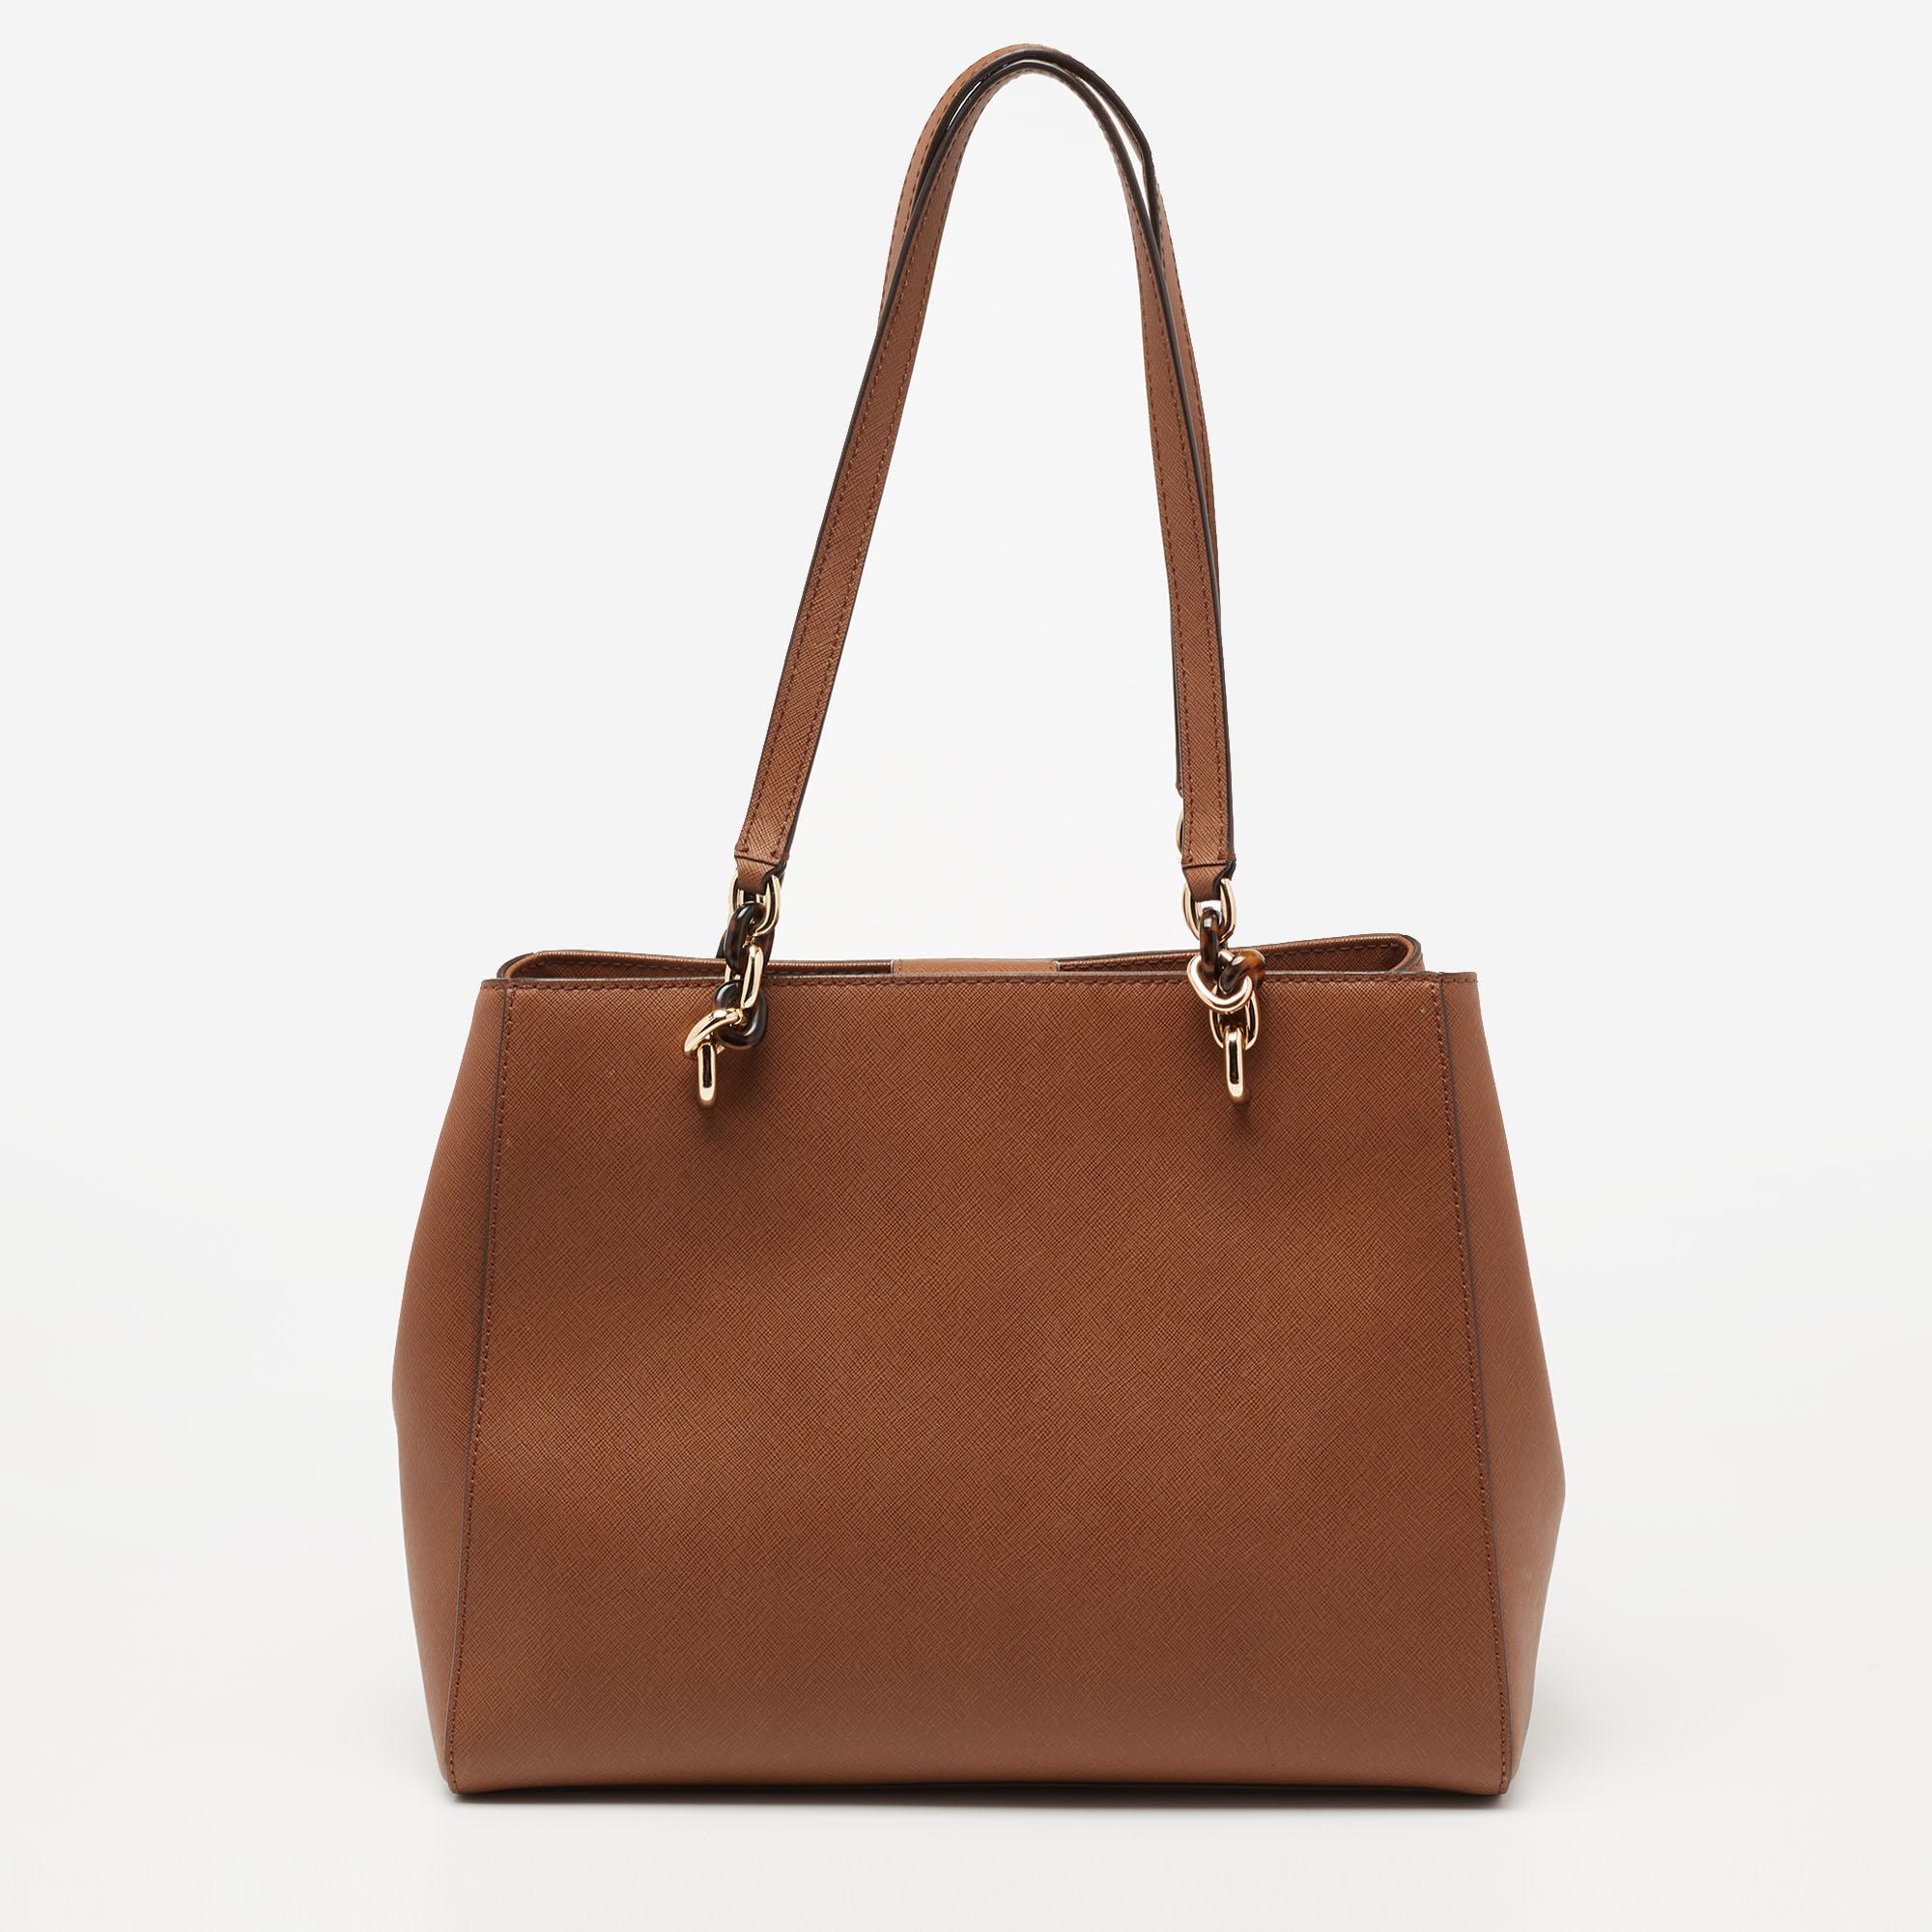 This Michael Kors tote aims to be an ideal everyday accessory. Created from leather, it has been styled with dual handles, a branded charm on the front, and gold-tone hardware. The fabric-lined interior is perfectly sized to dutifully hold your